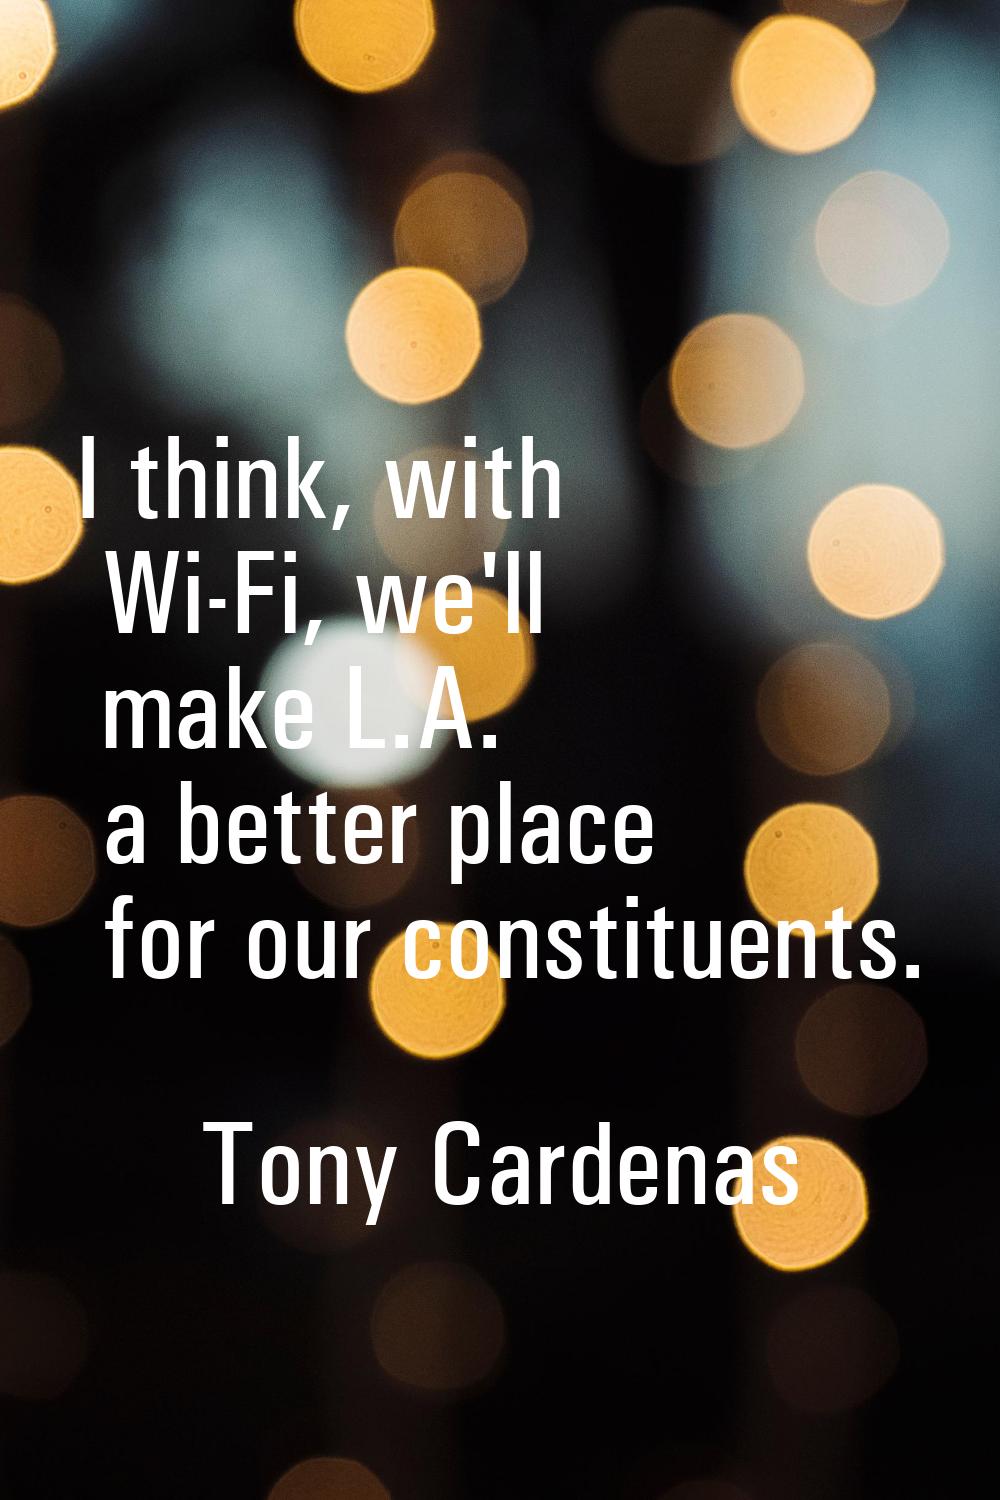 I think, with Wi-Fi, we'll make L.A. a better place for our constituents.